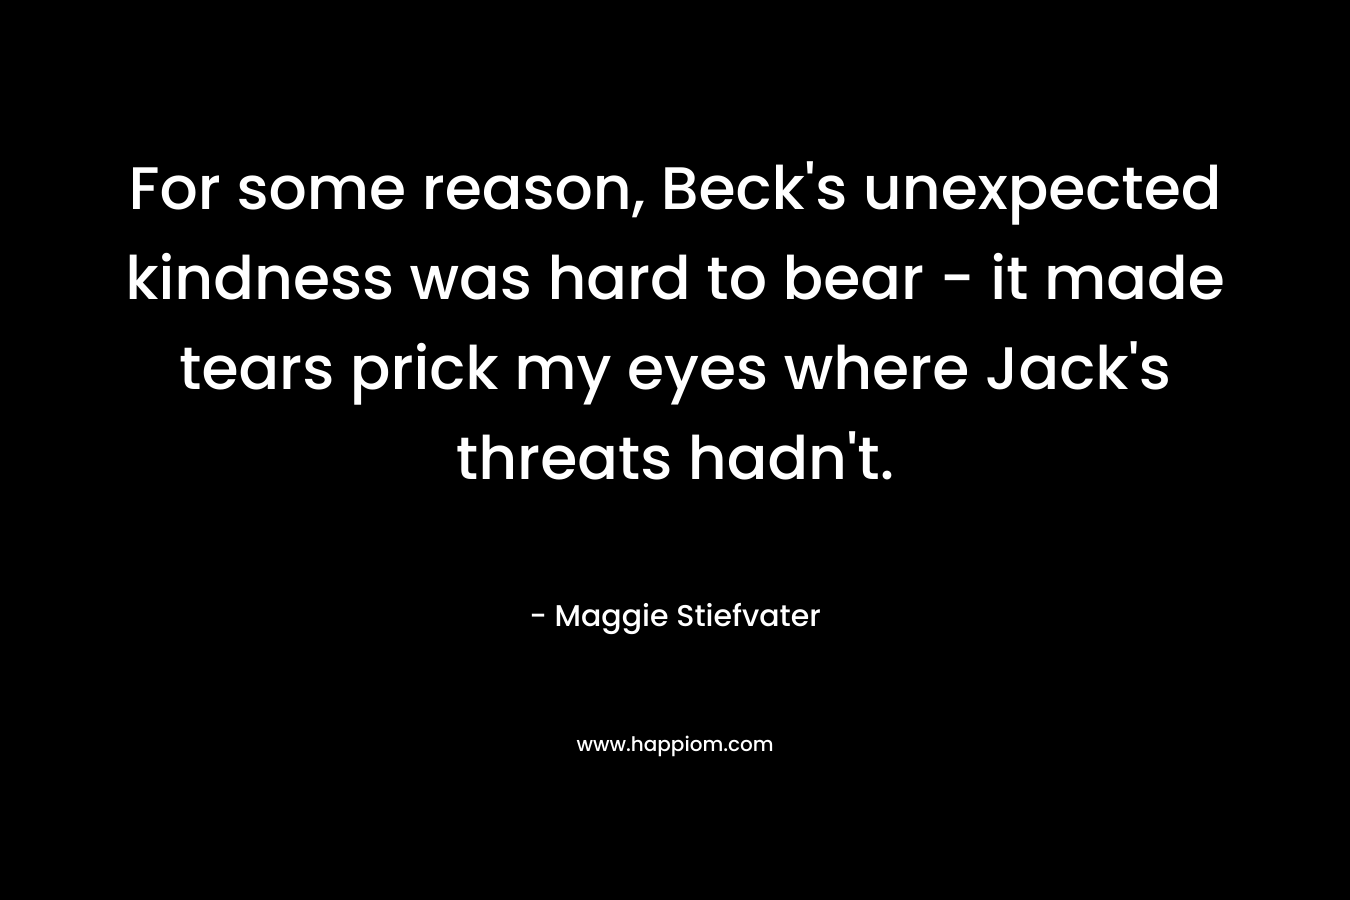 For some reason, Beck’s unexpected kindness was hard to bear – it made tears prick my eyes where Jack’s threats hadn’t. – Maggie Stiefvater